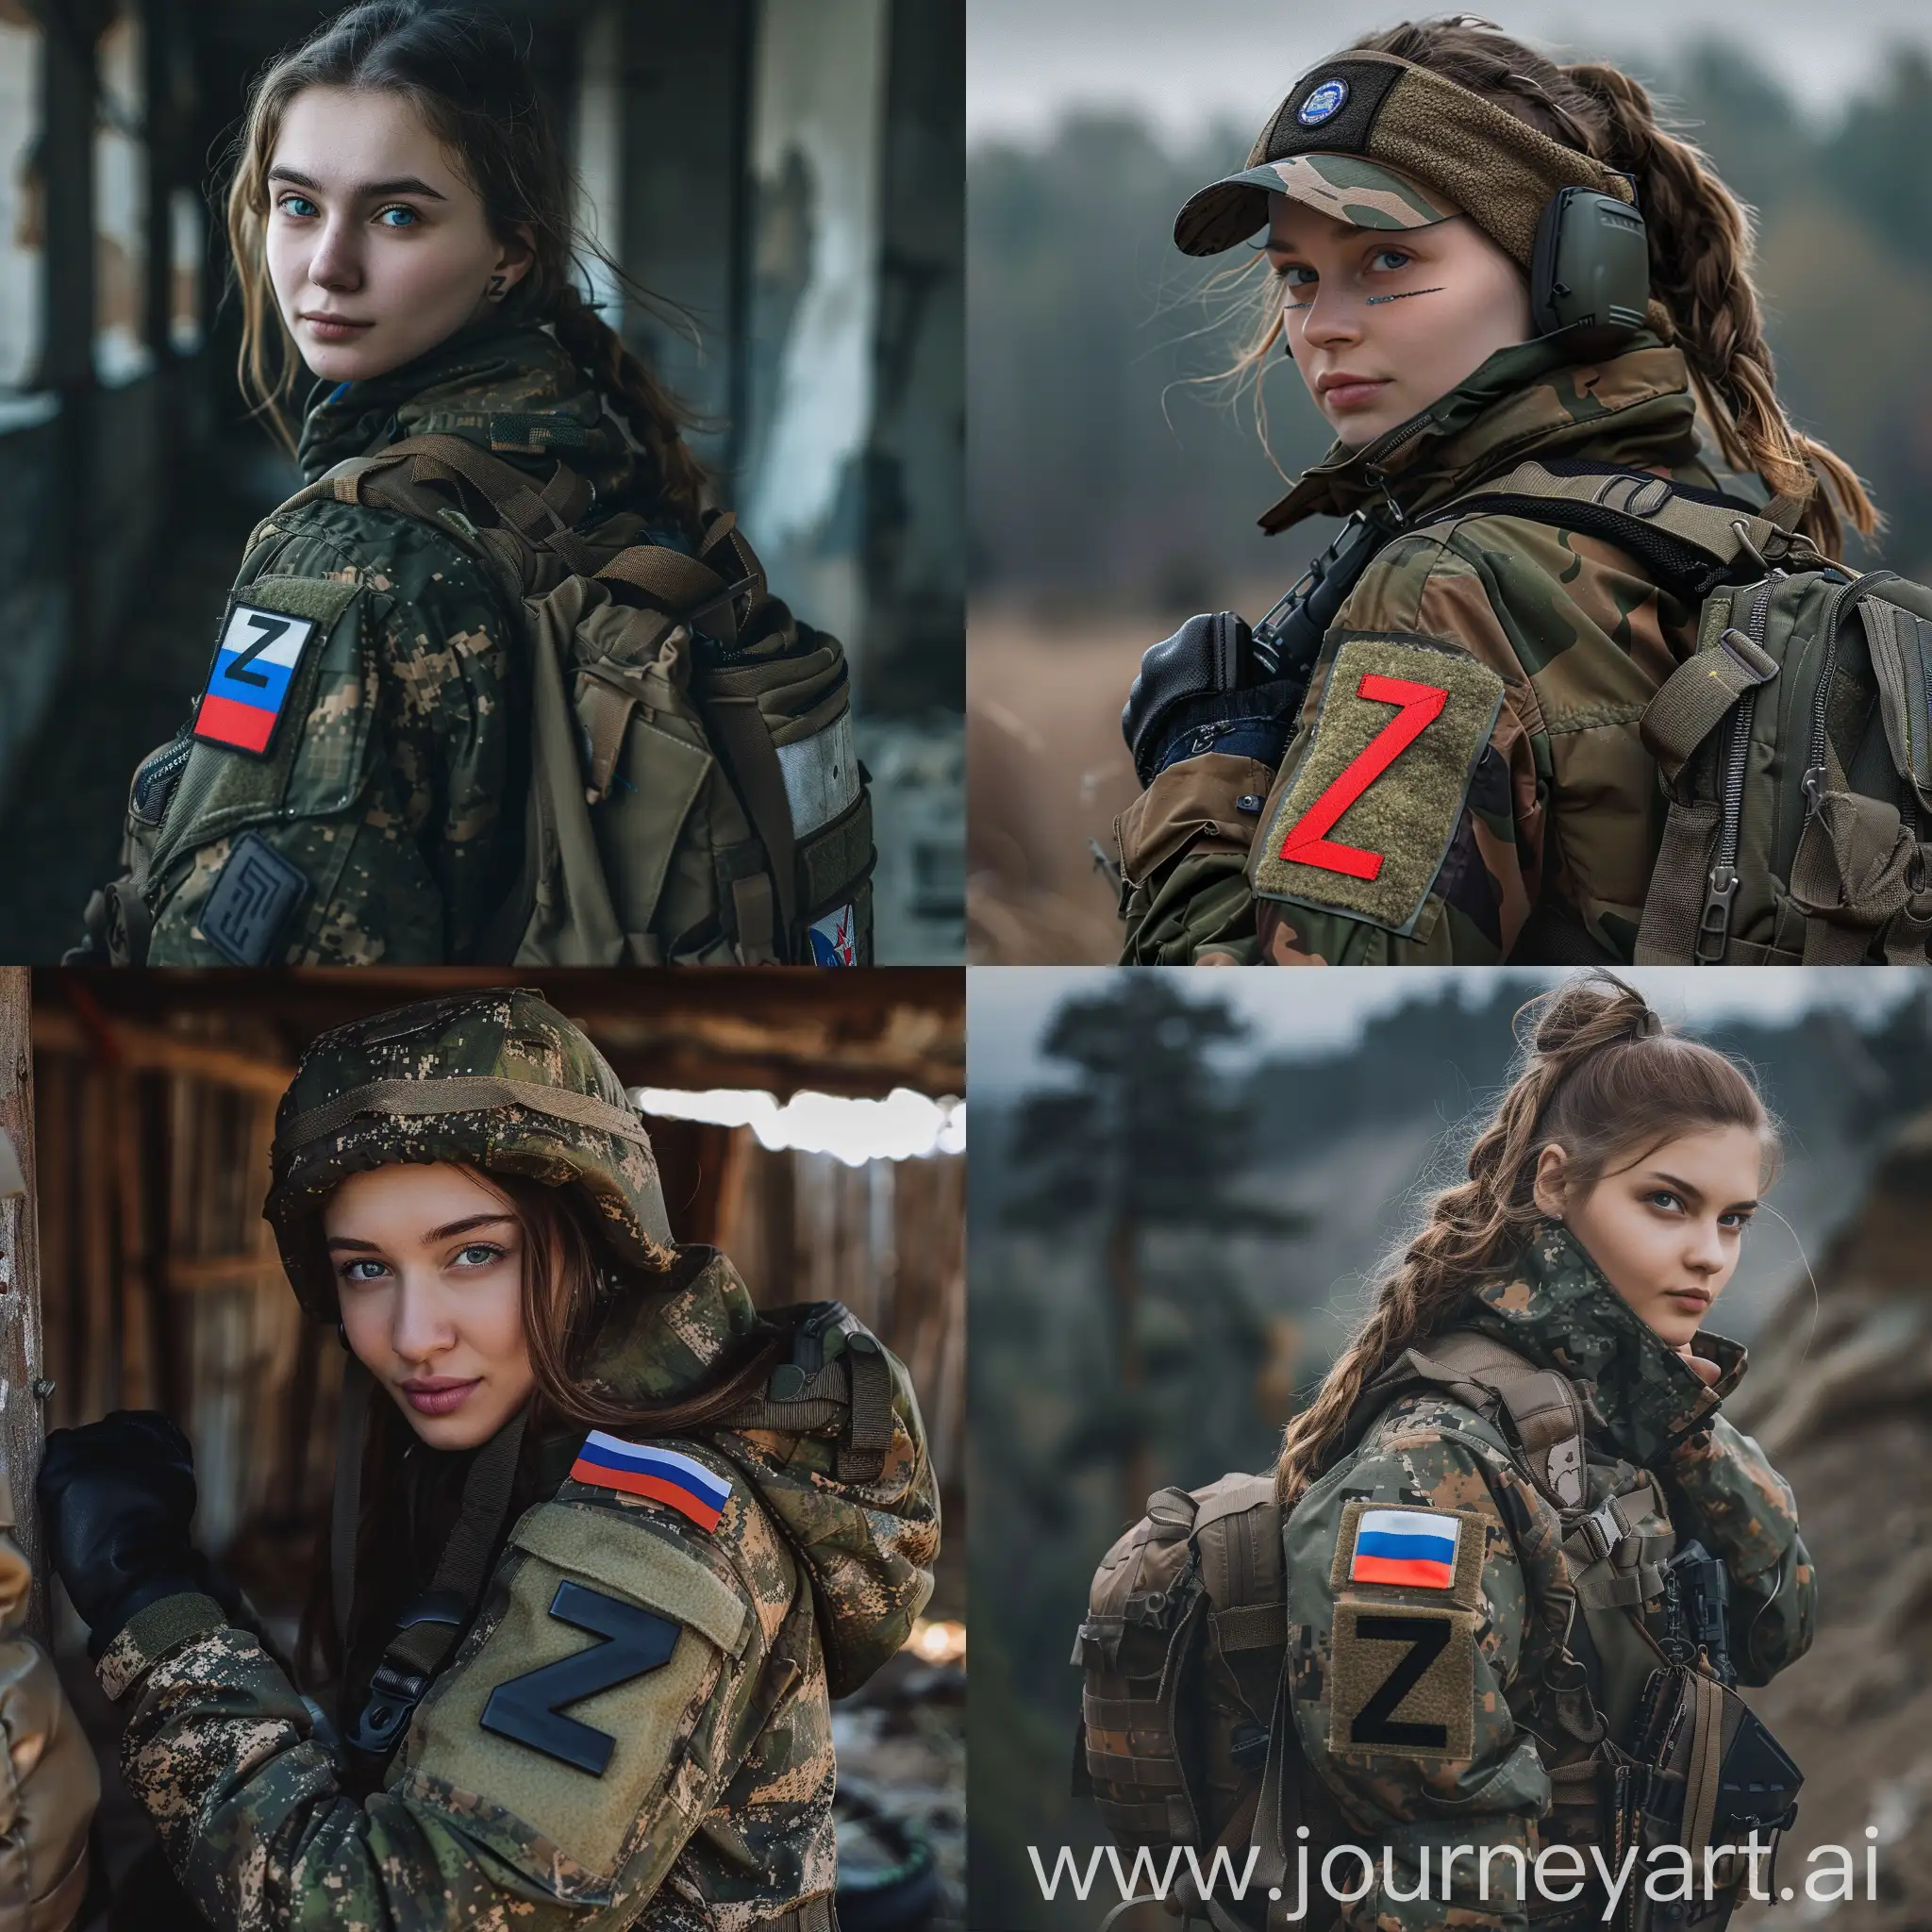 Russian-Soldier-Girl-on-Special-Military-Operation-with-Letter-Z-and-Flag